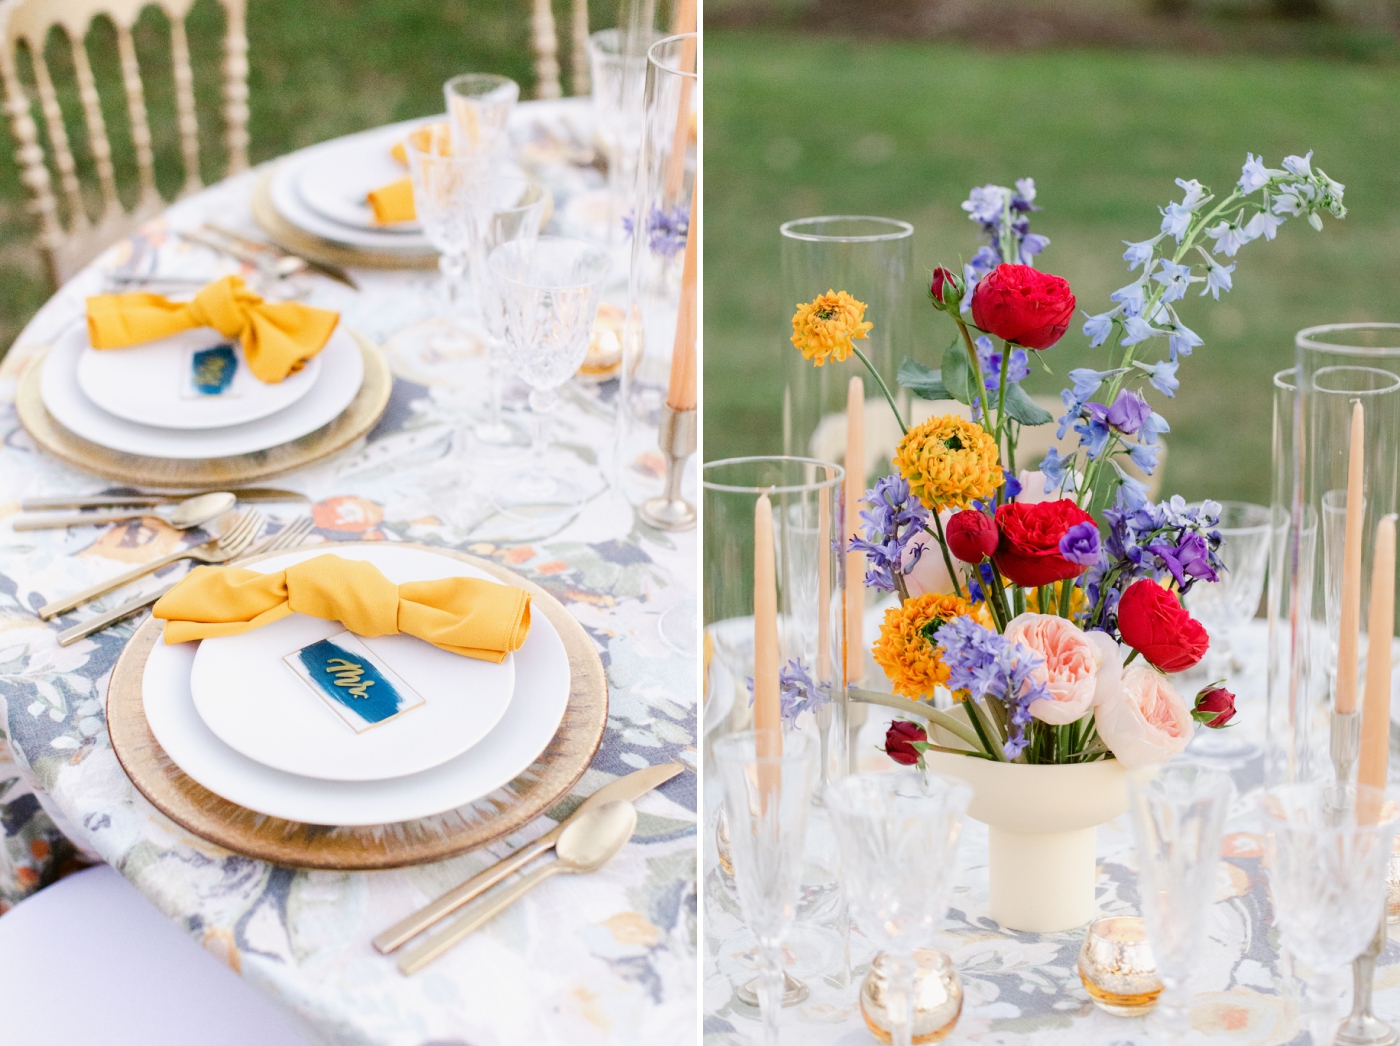 2022 wedding trends - whimsical 